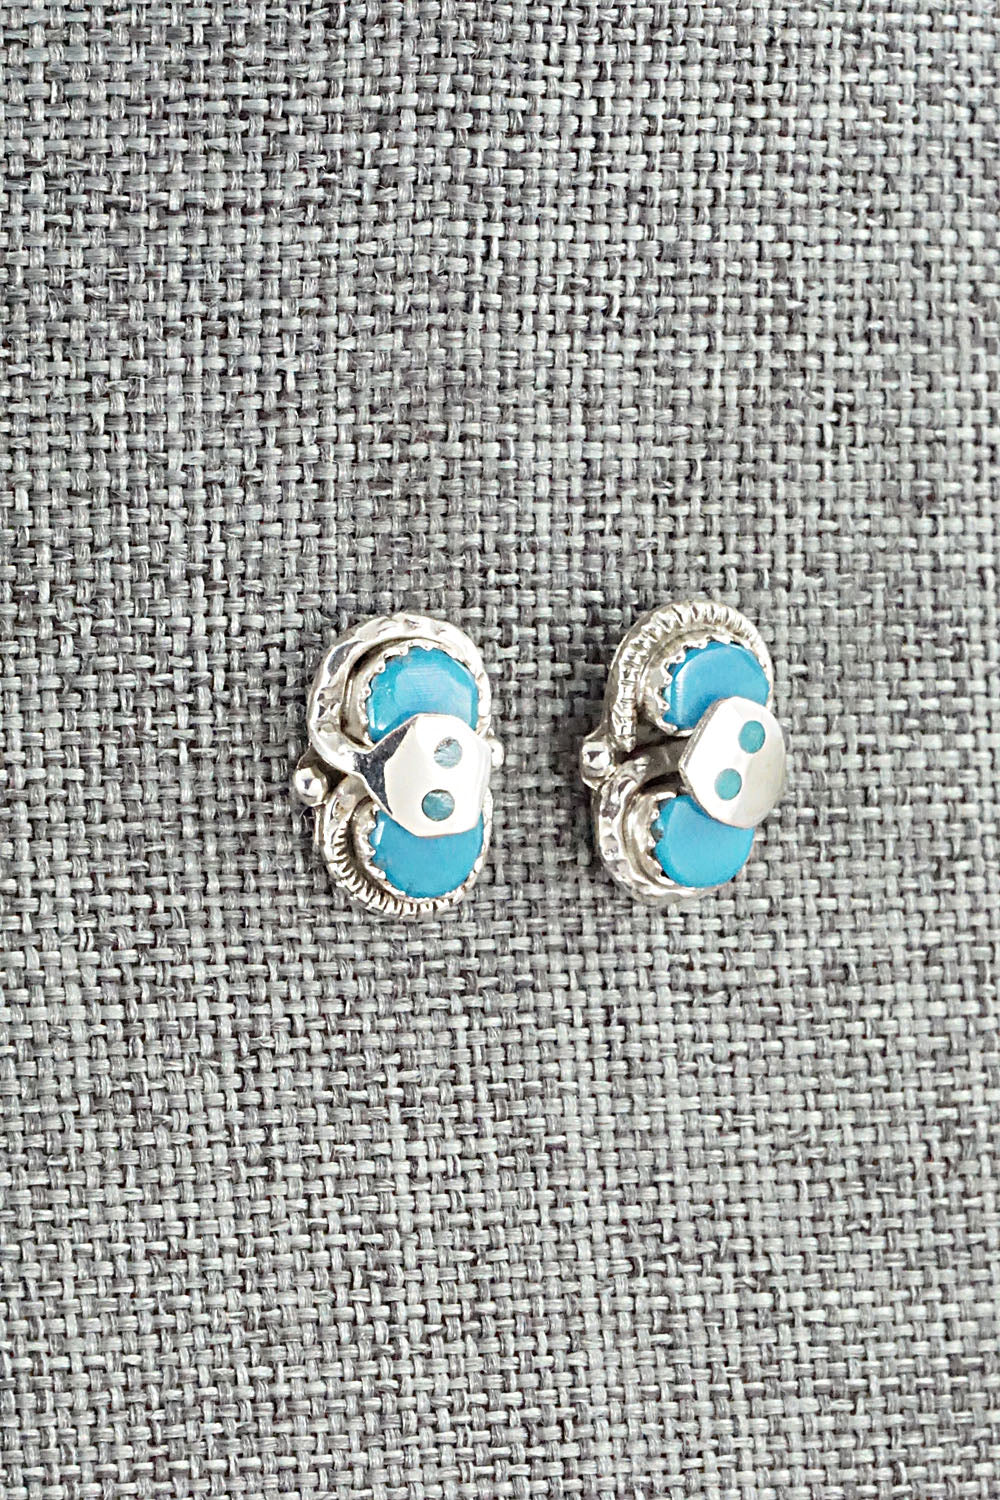 Turquoise & Sterling Silver Earrings - Joy Calavaza